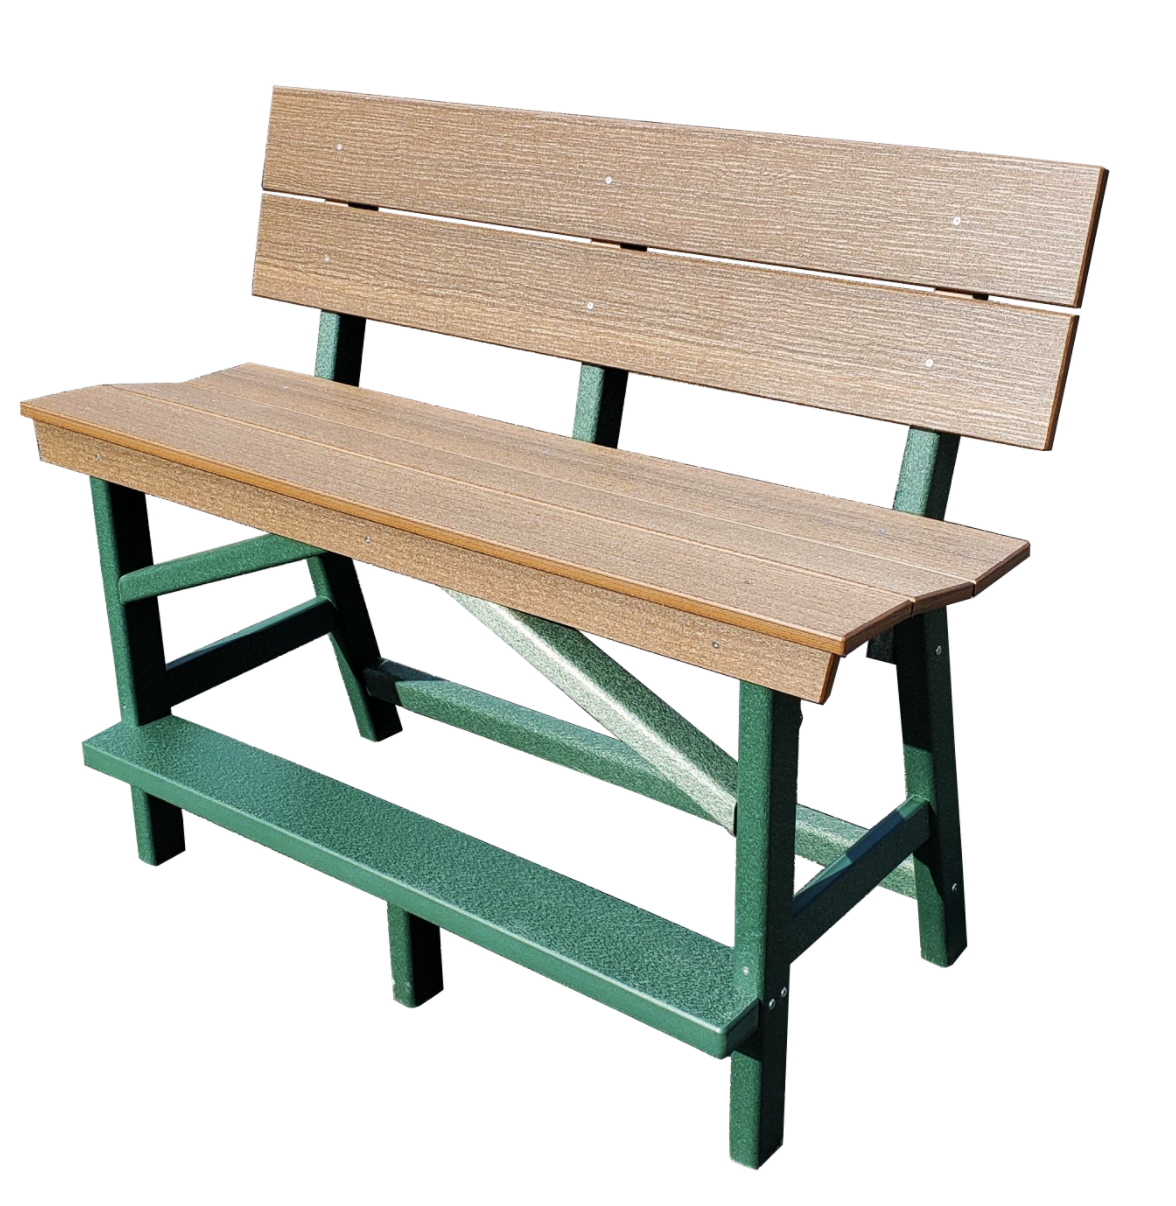 Perfect Choice Furniture Recycled Plastic Stanton Standard Bar Height Bench With Back - LEAD TIME TO SHIP 4 WEEKS OR LESS